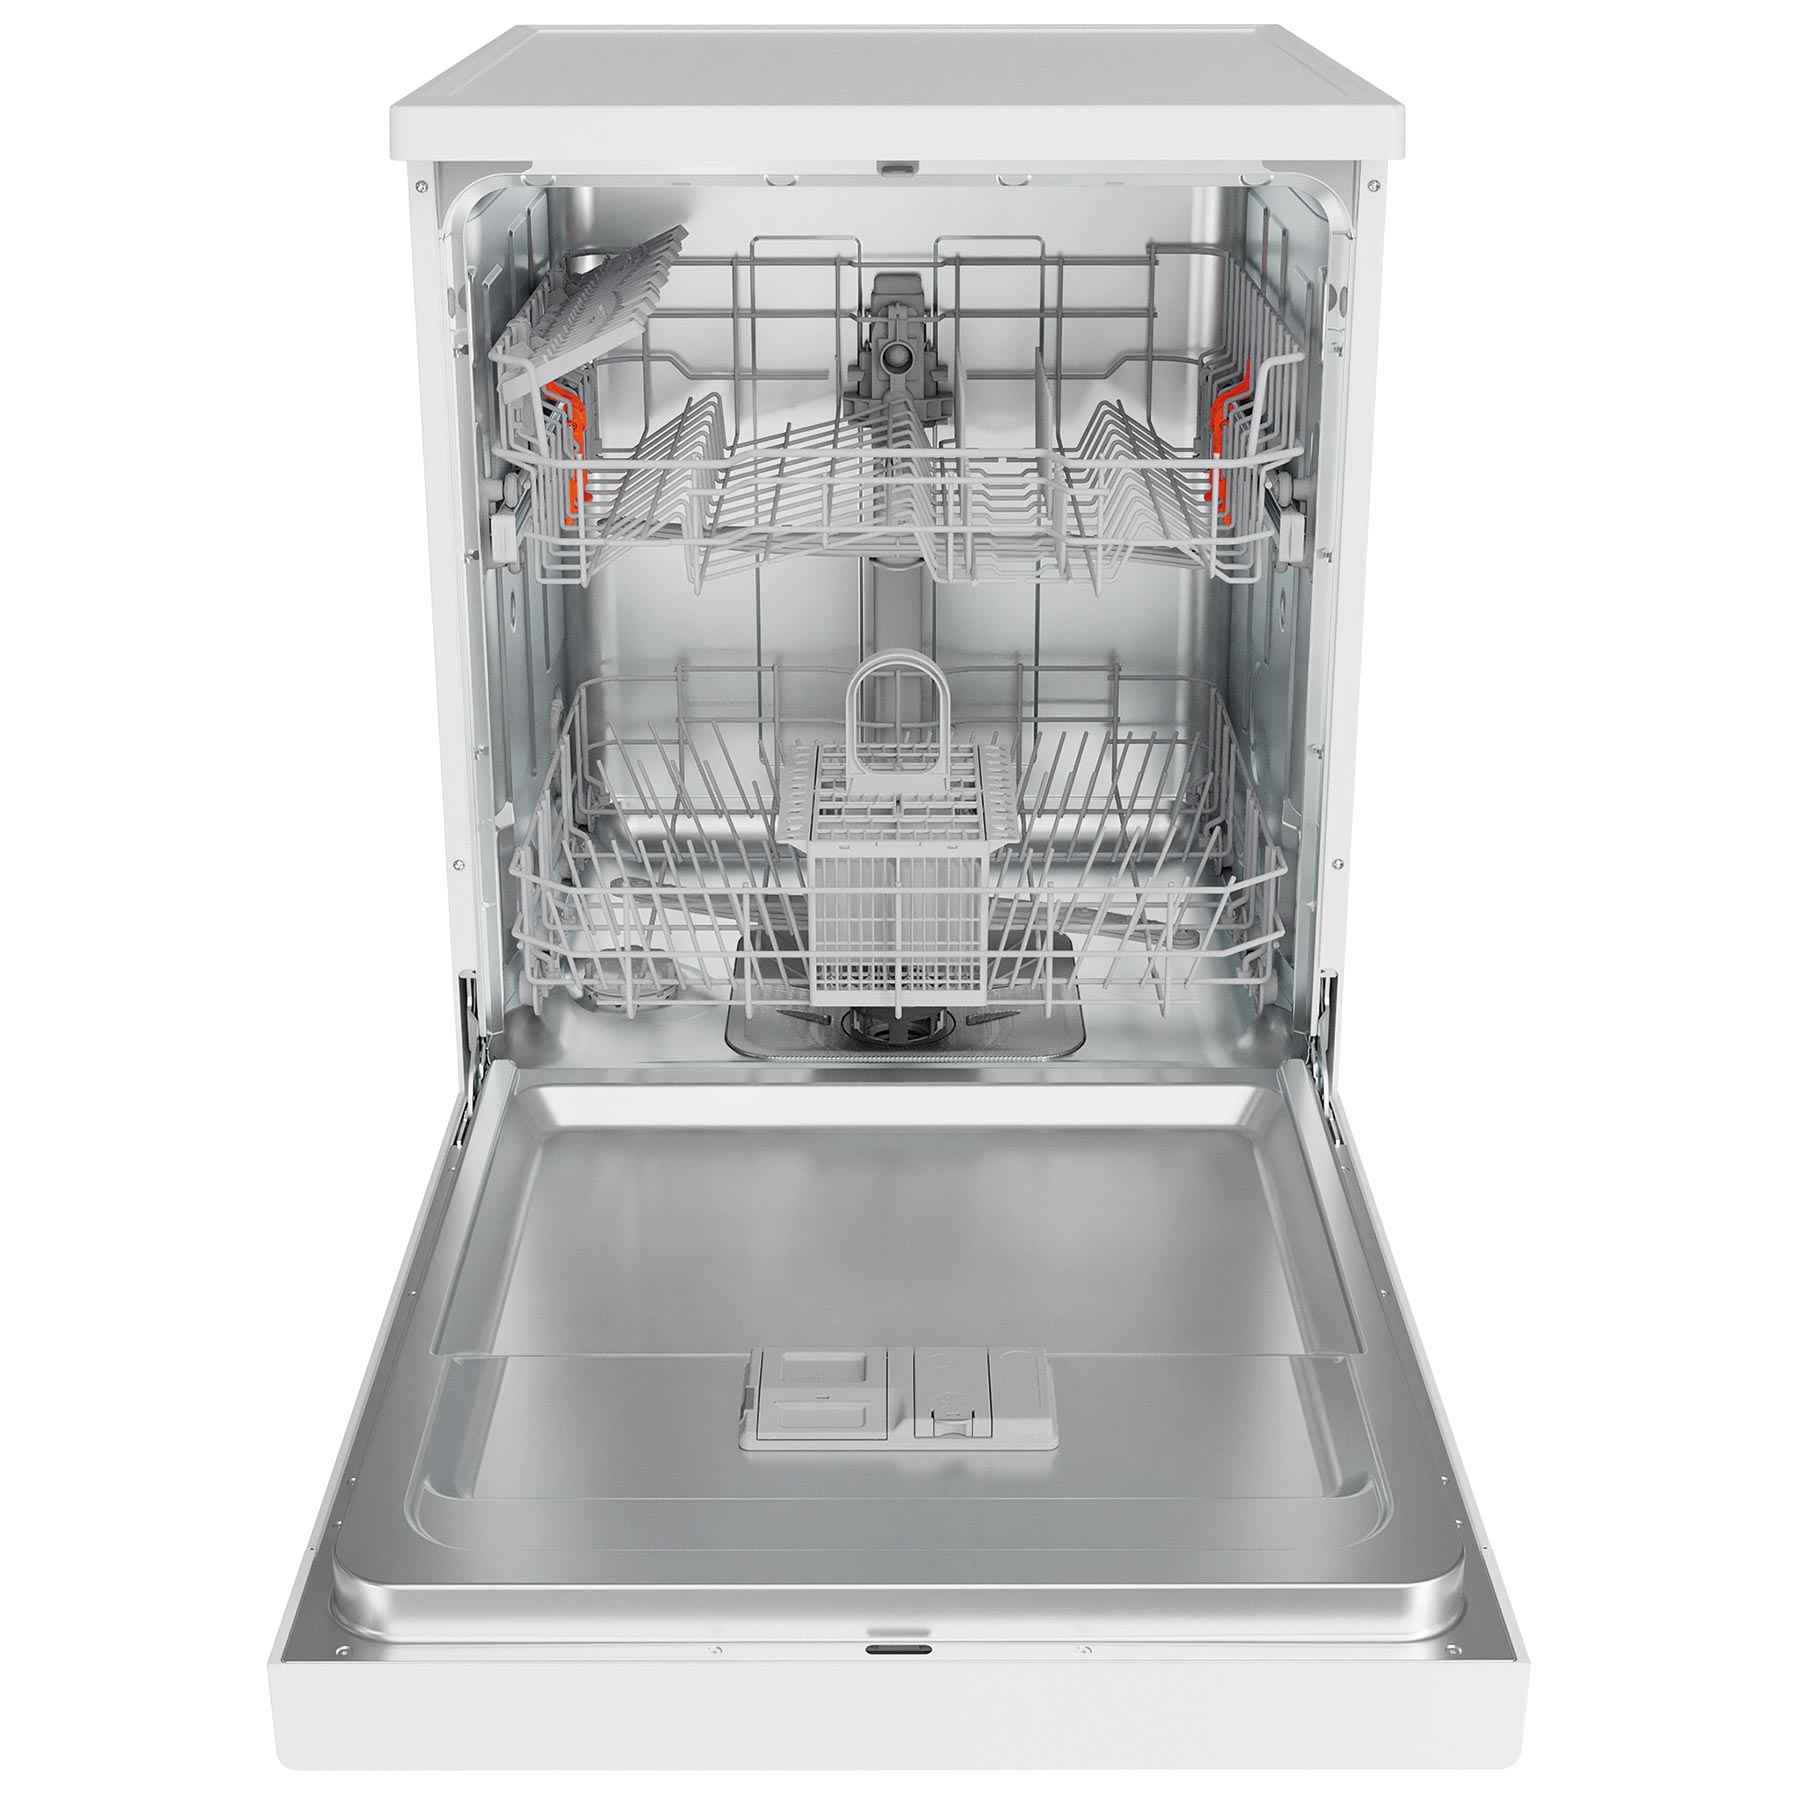 Photos - Dishwasher Hotpoint-Ariston Hotpoint H2FHL626 60cm  in White 14 Place Setting E Rated 